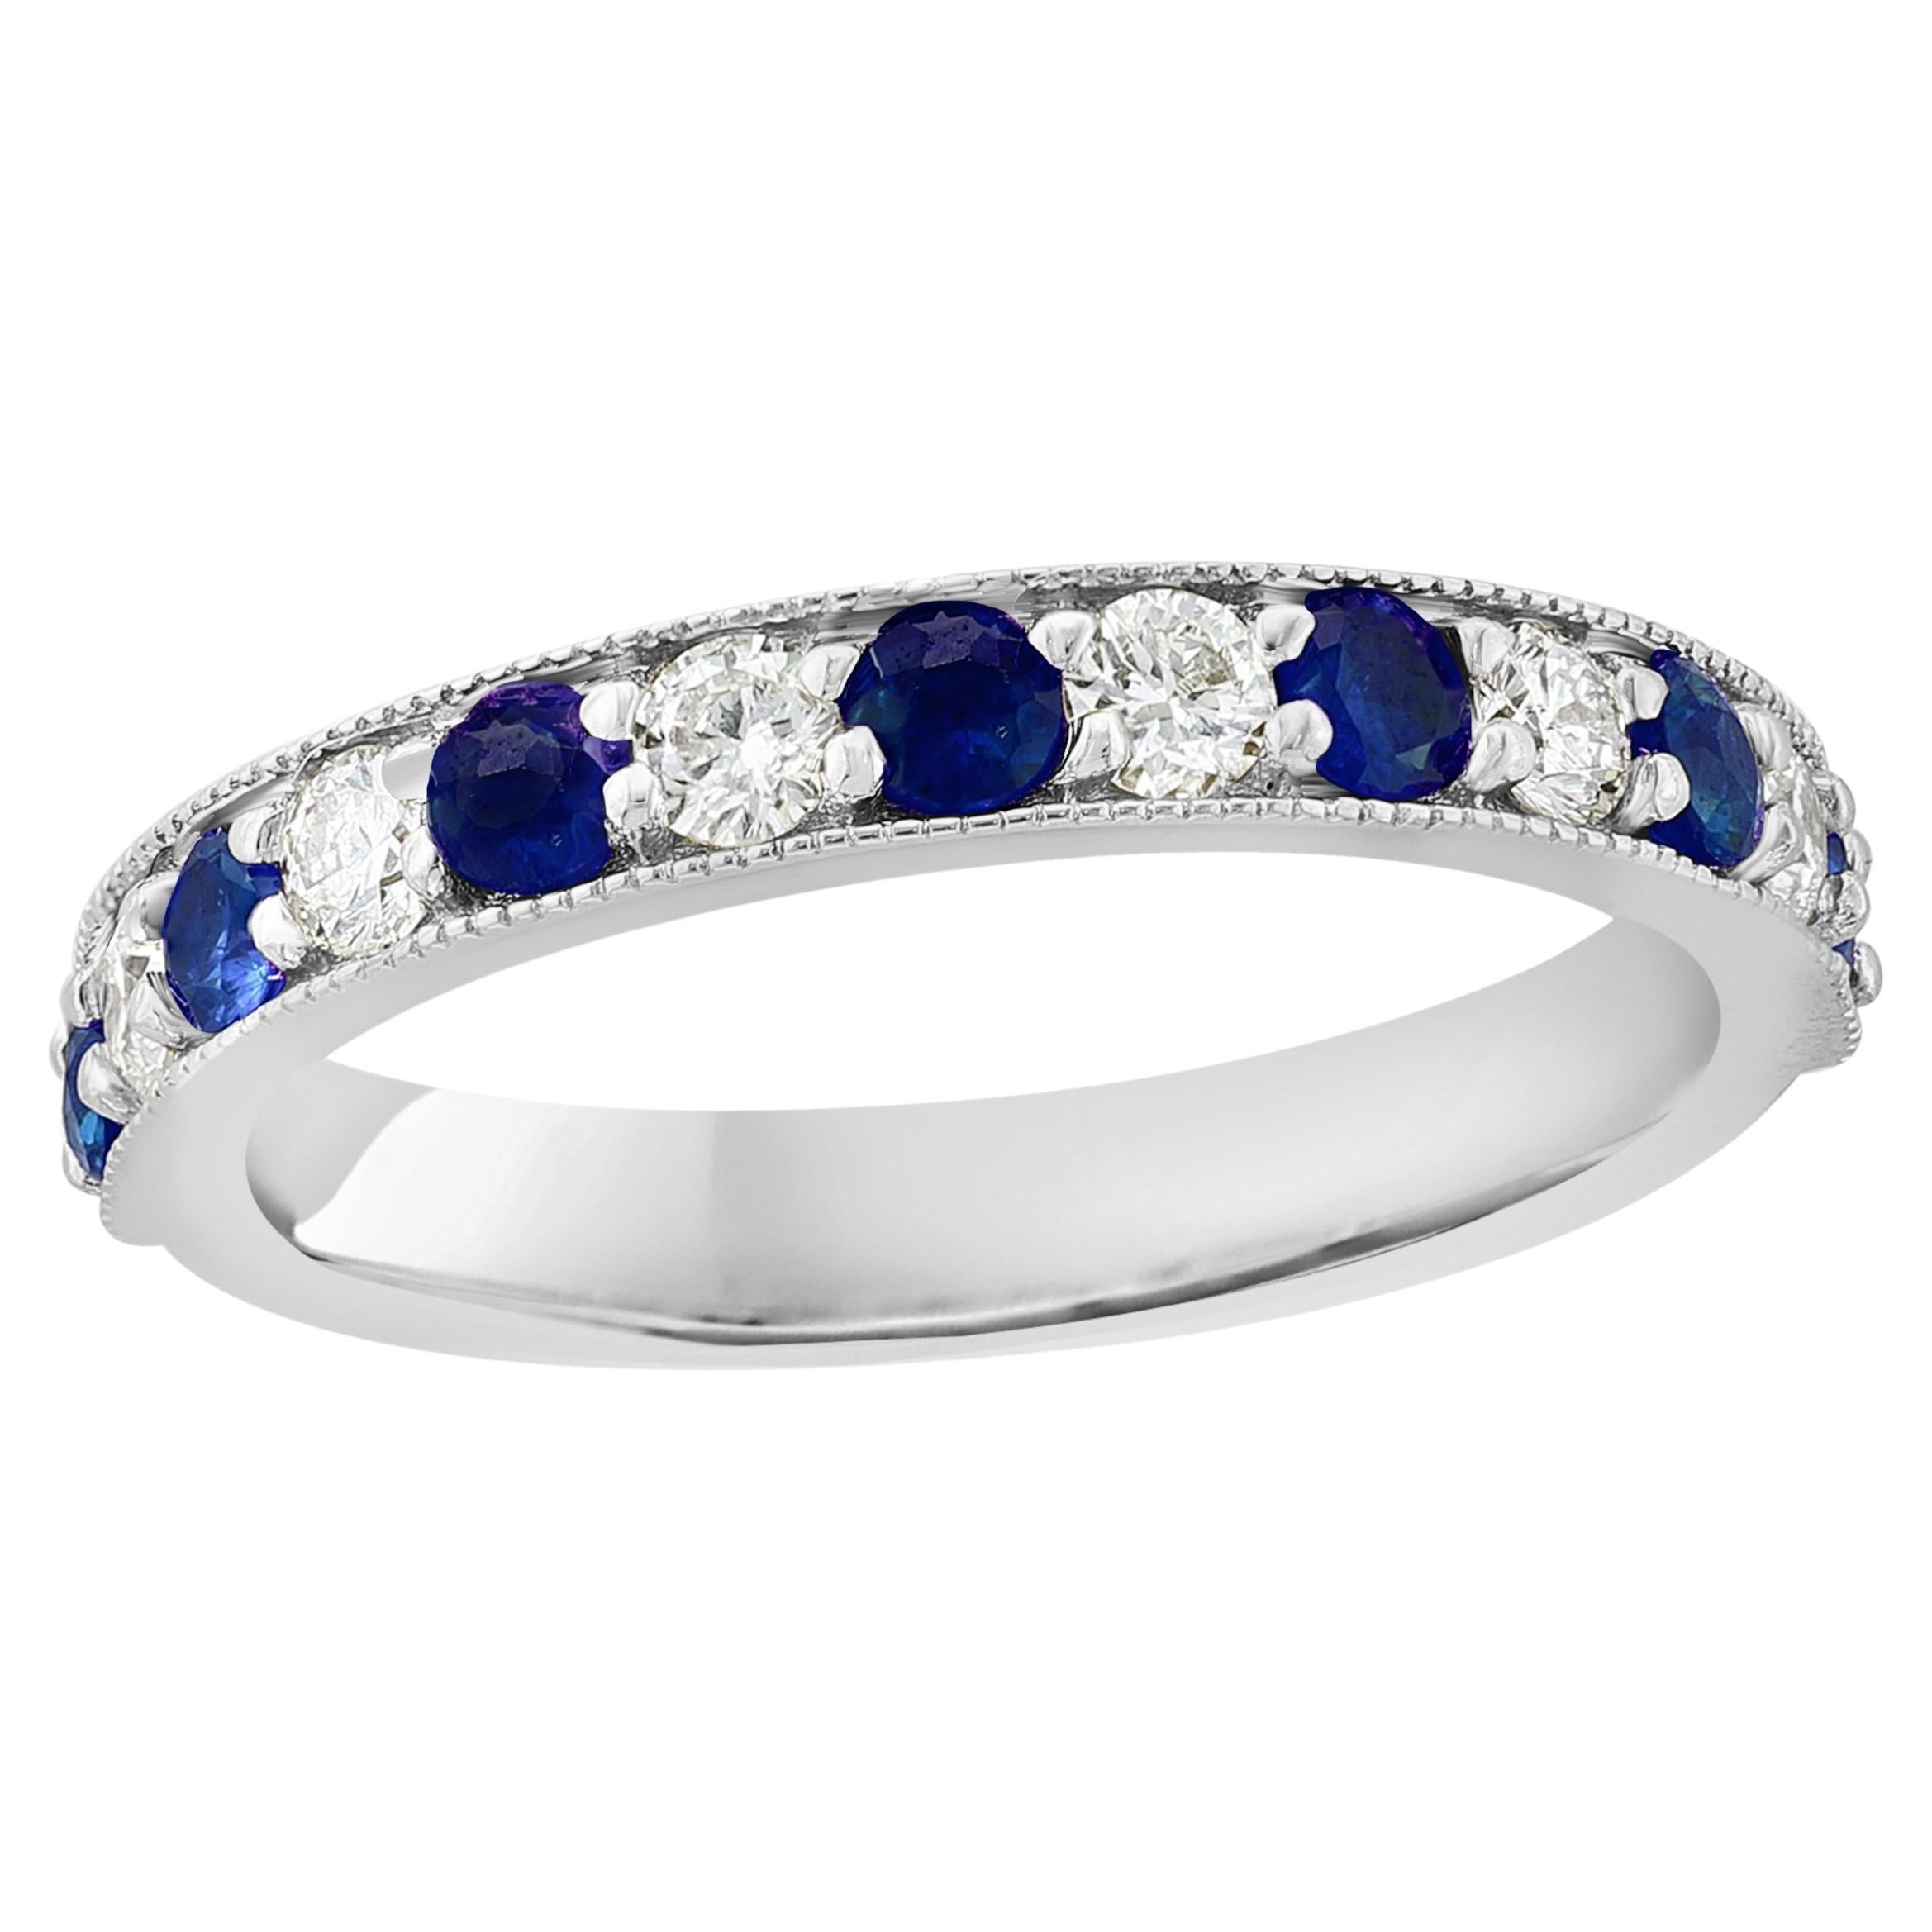 0.65 Carat Brilliant Cut Blue Sapphire and Diamond Band in 14K White Gold For Sale